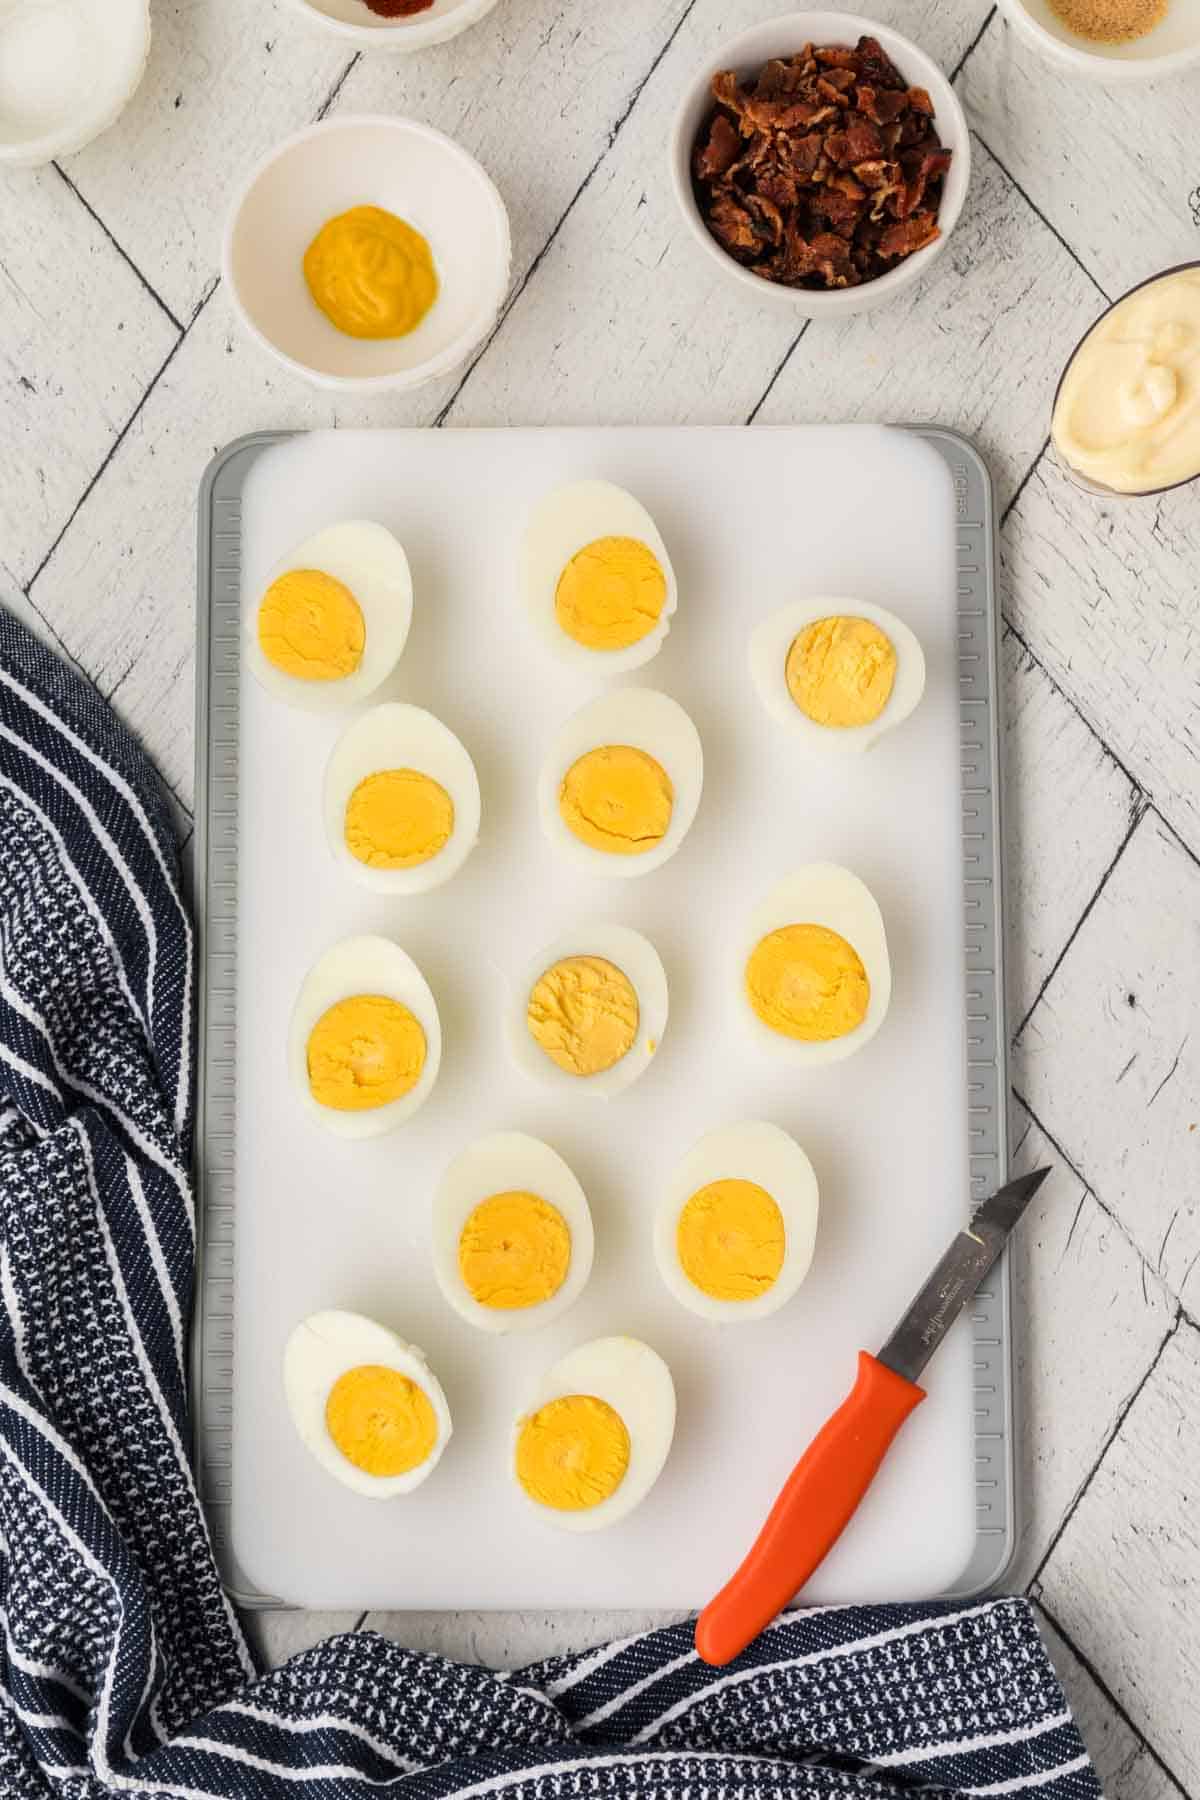 Hard boiled eggs cut in half on a cutting board with bowls of crushed bacon, mustard, and mayo on the side